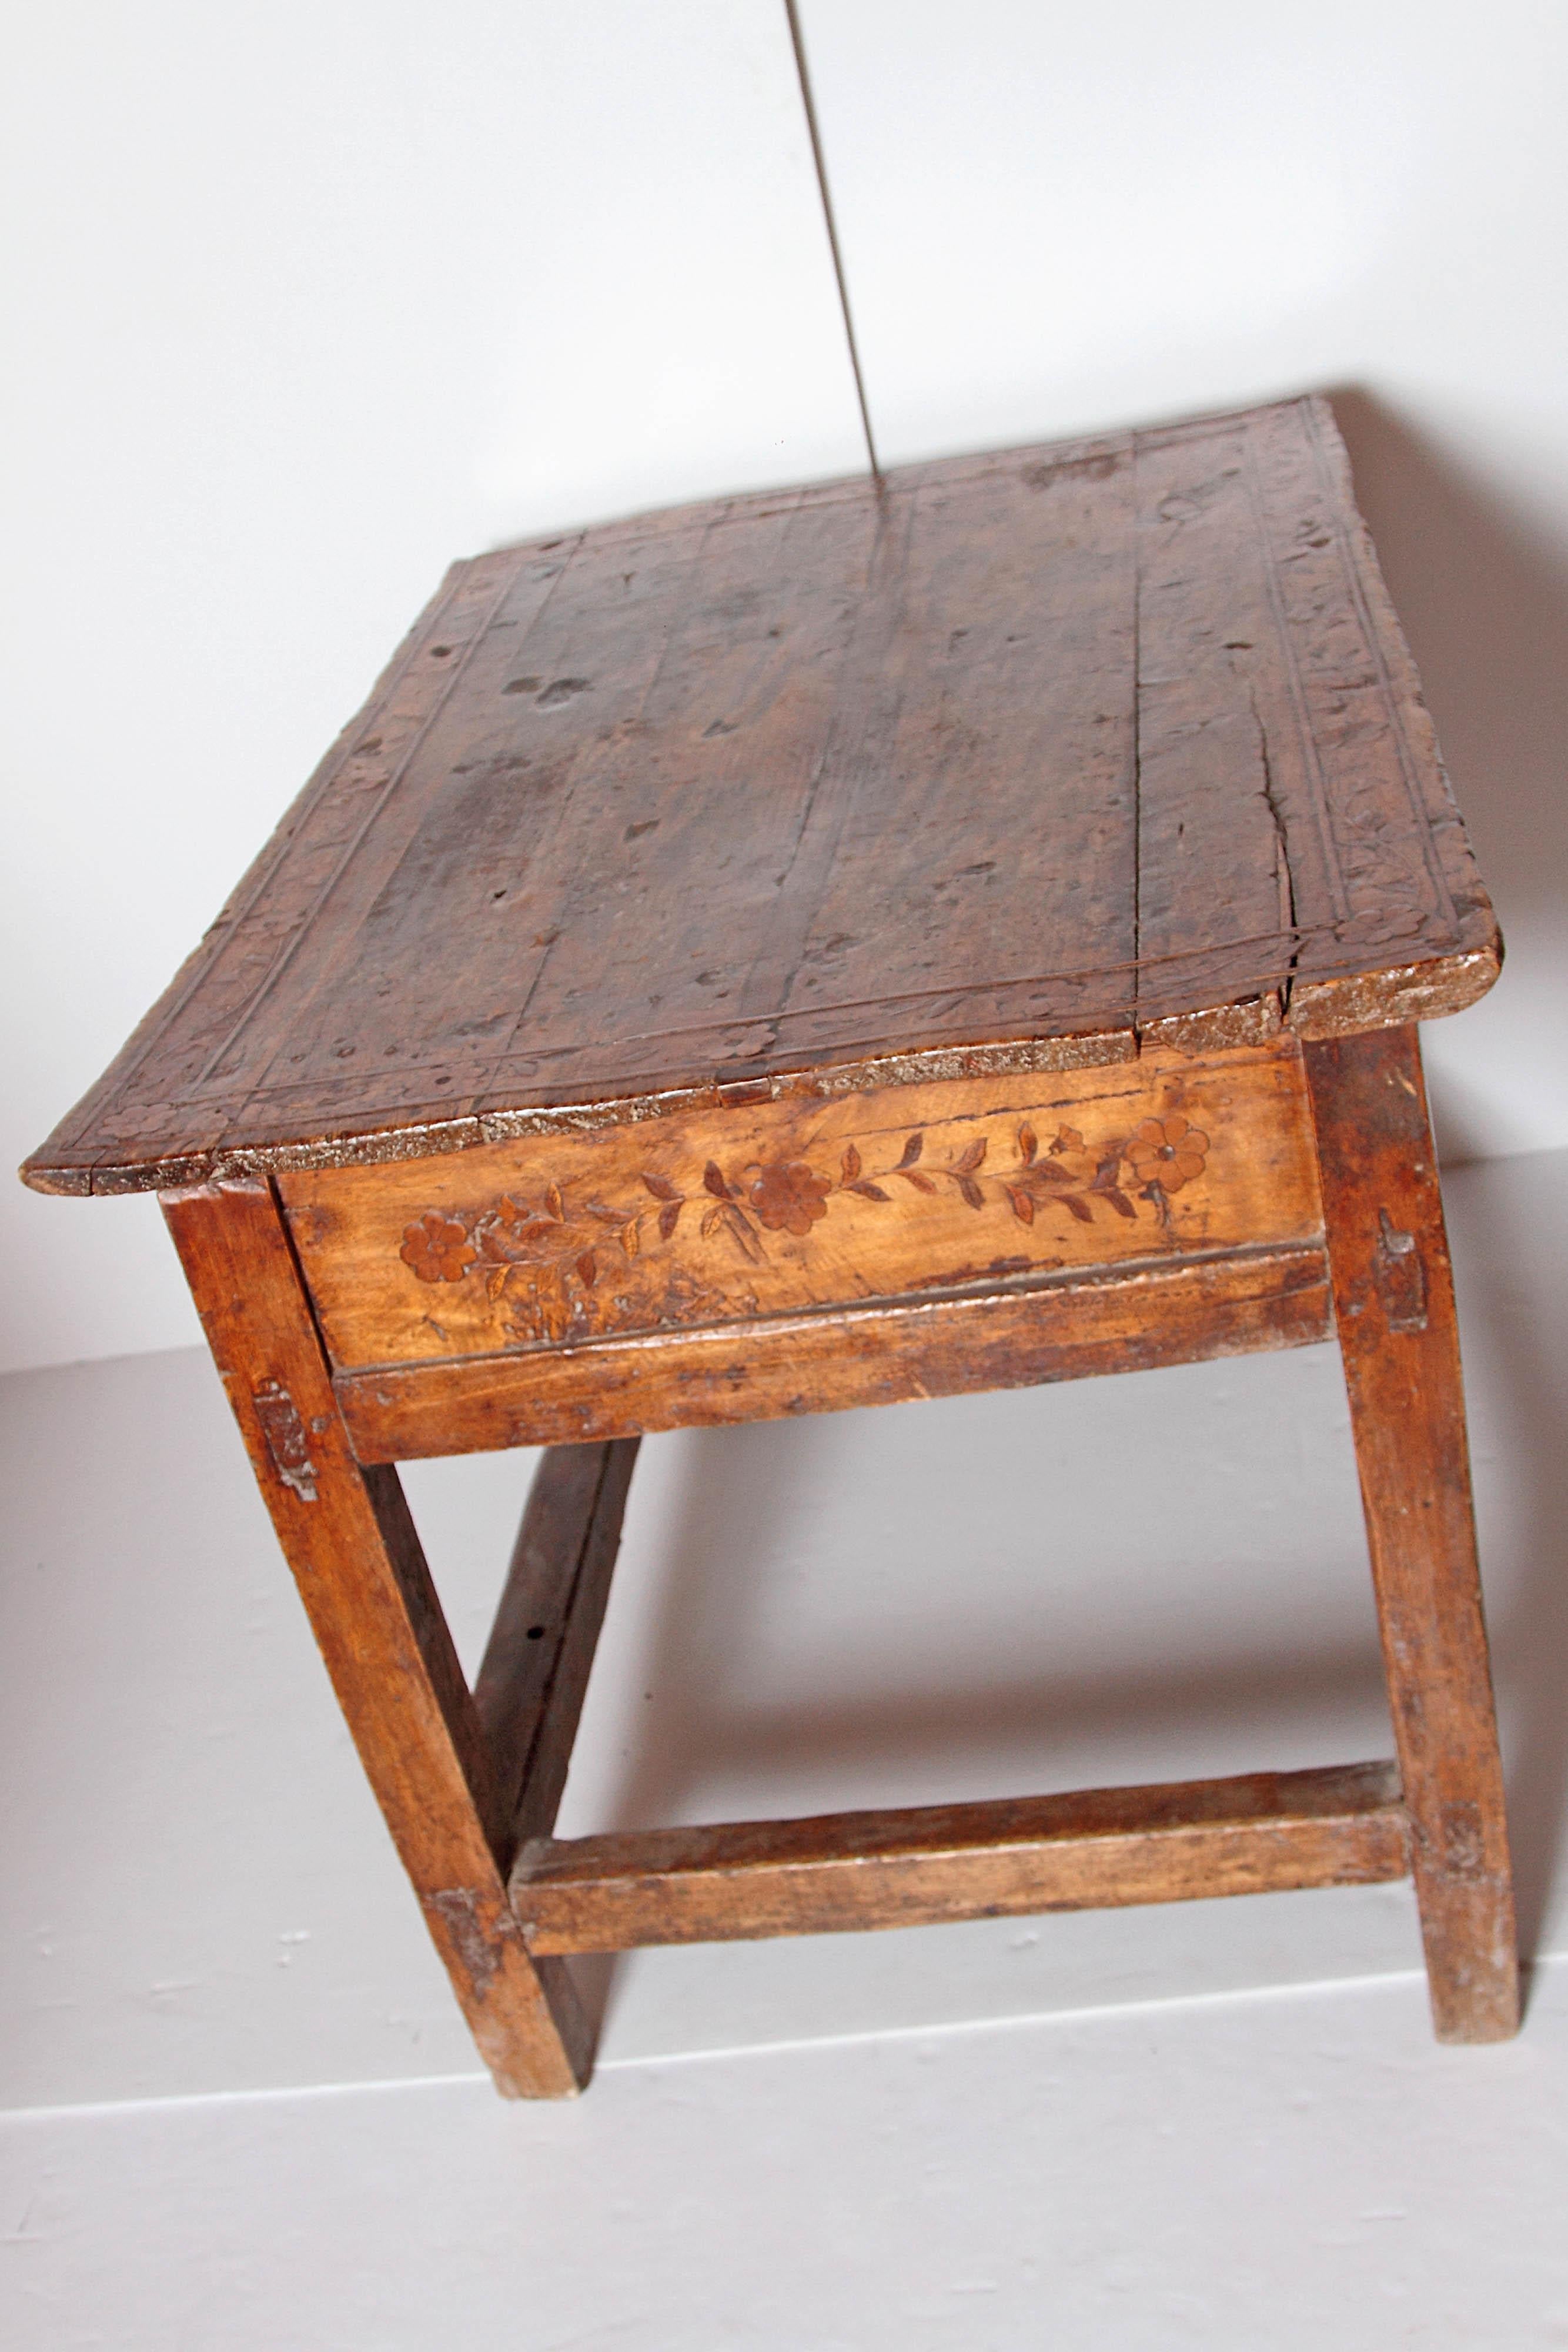 18th Century and Earlier 18th Century Spanish Colonial Table from Columbia